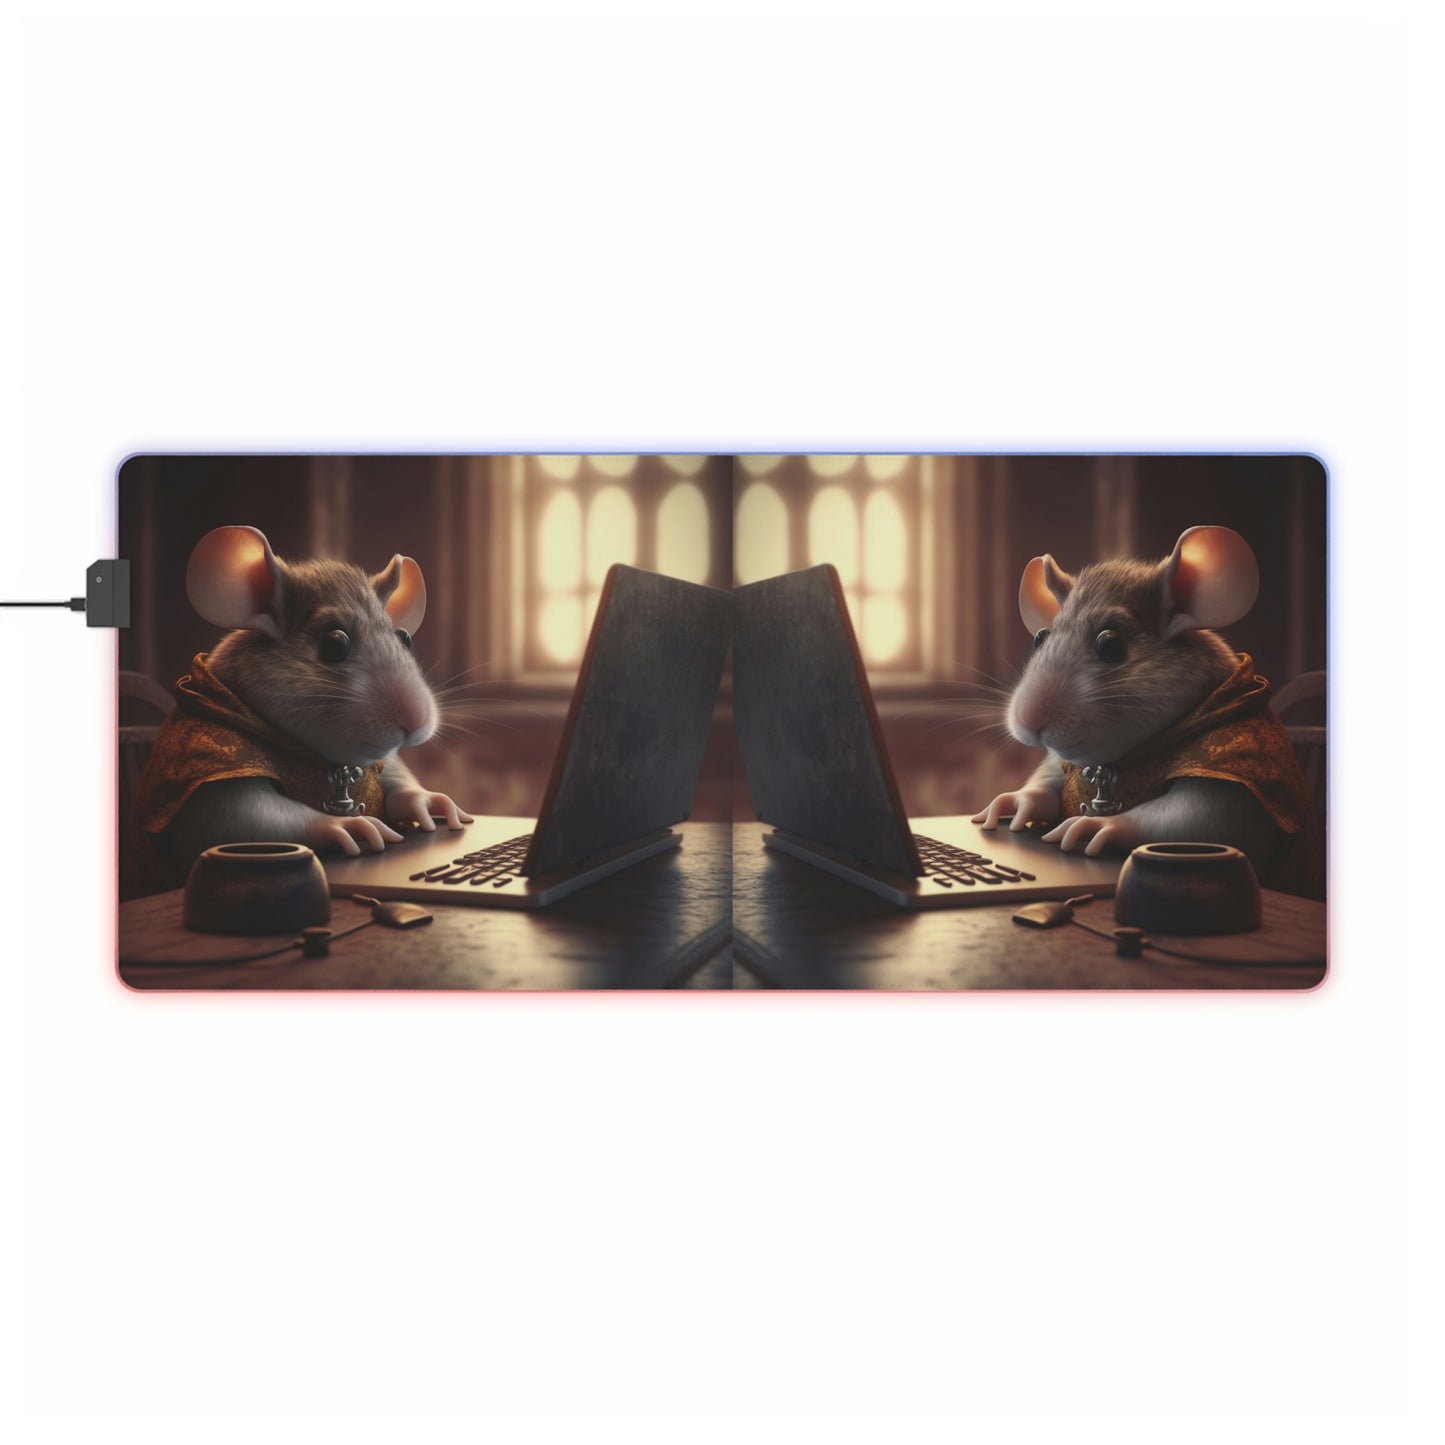 LED Gaming Mouse Pad PC Mouse 4